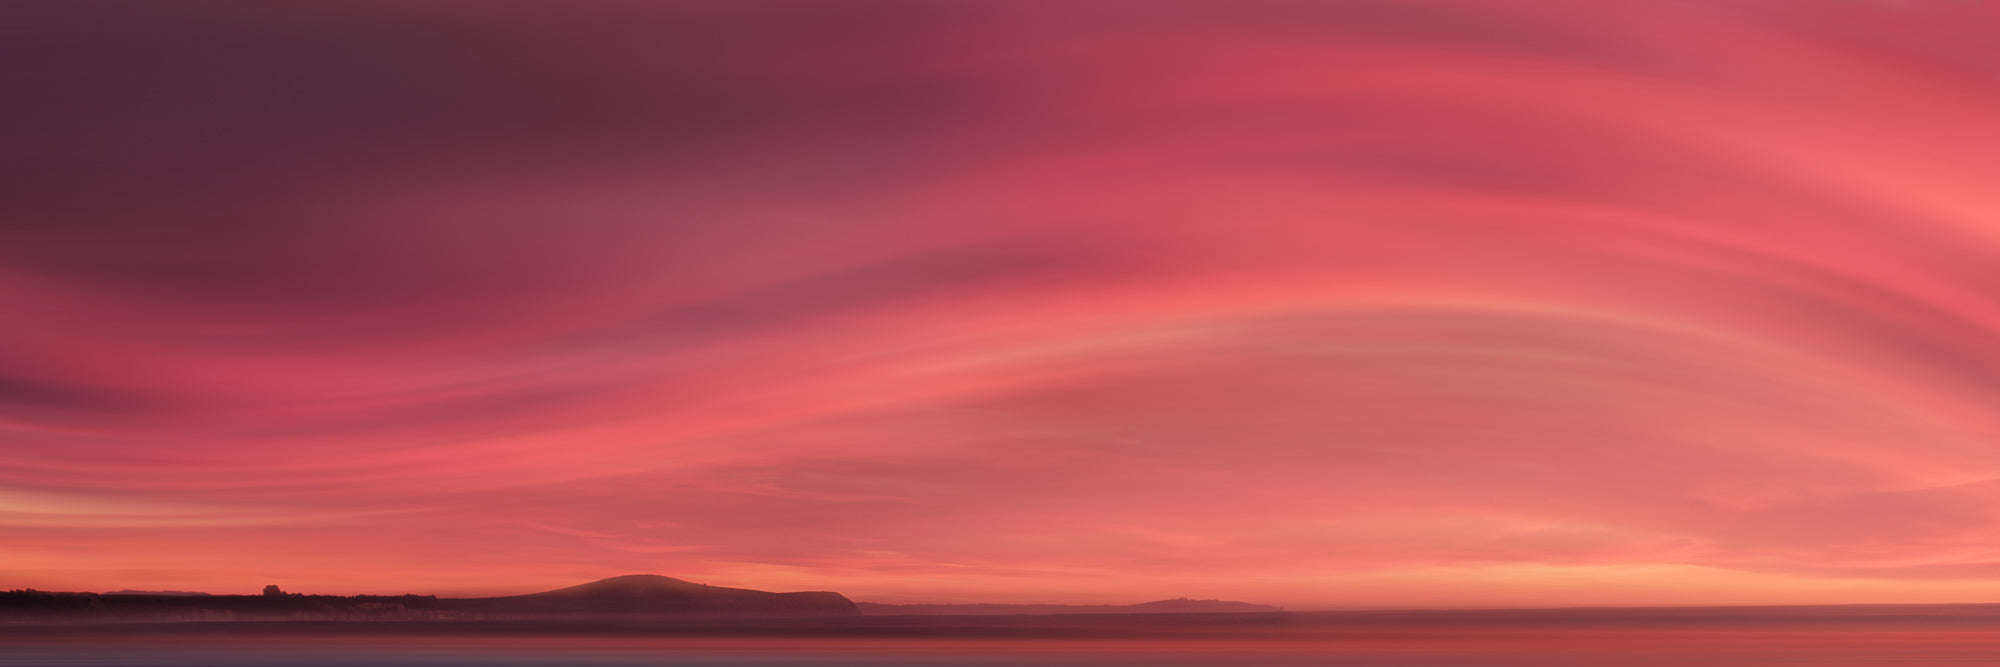 Sunrise over Moeraki Beach depicted in a photograph, showcasing vibrant red and pink clouds stretched across the sky.